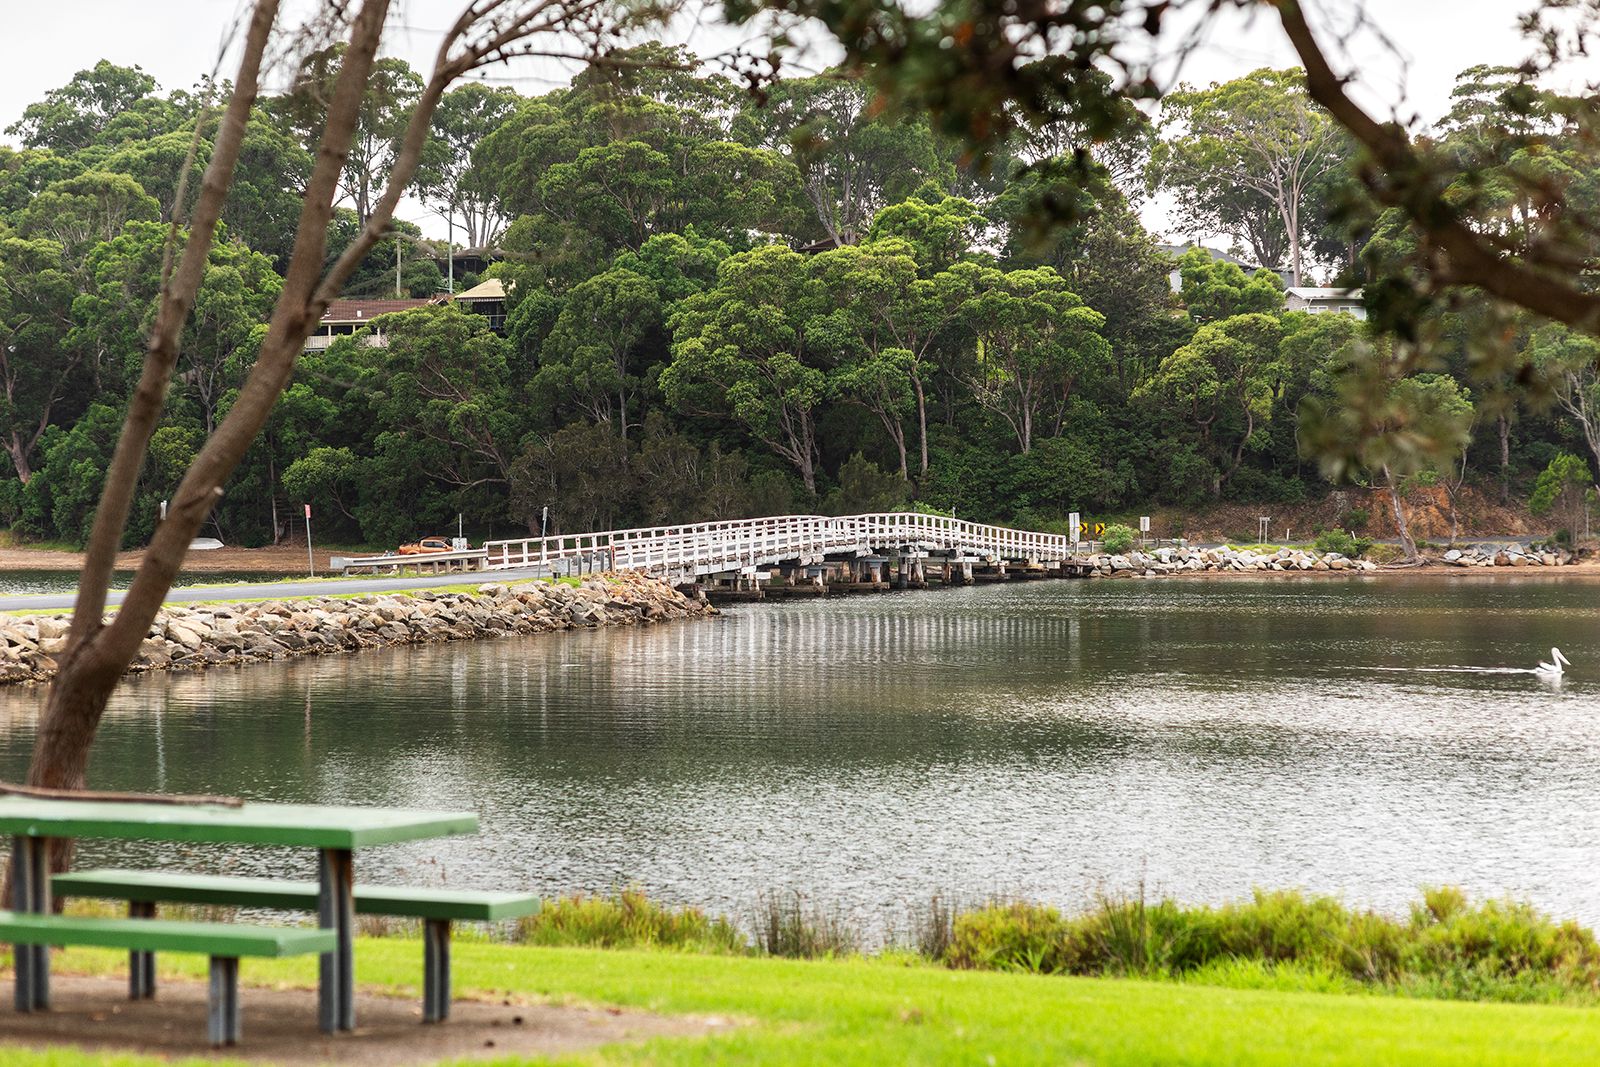 Wallaga lake bridge on still cloudy day with picnic bench in foreground